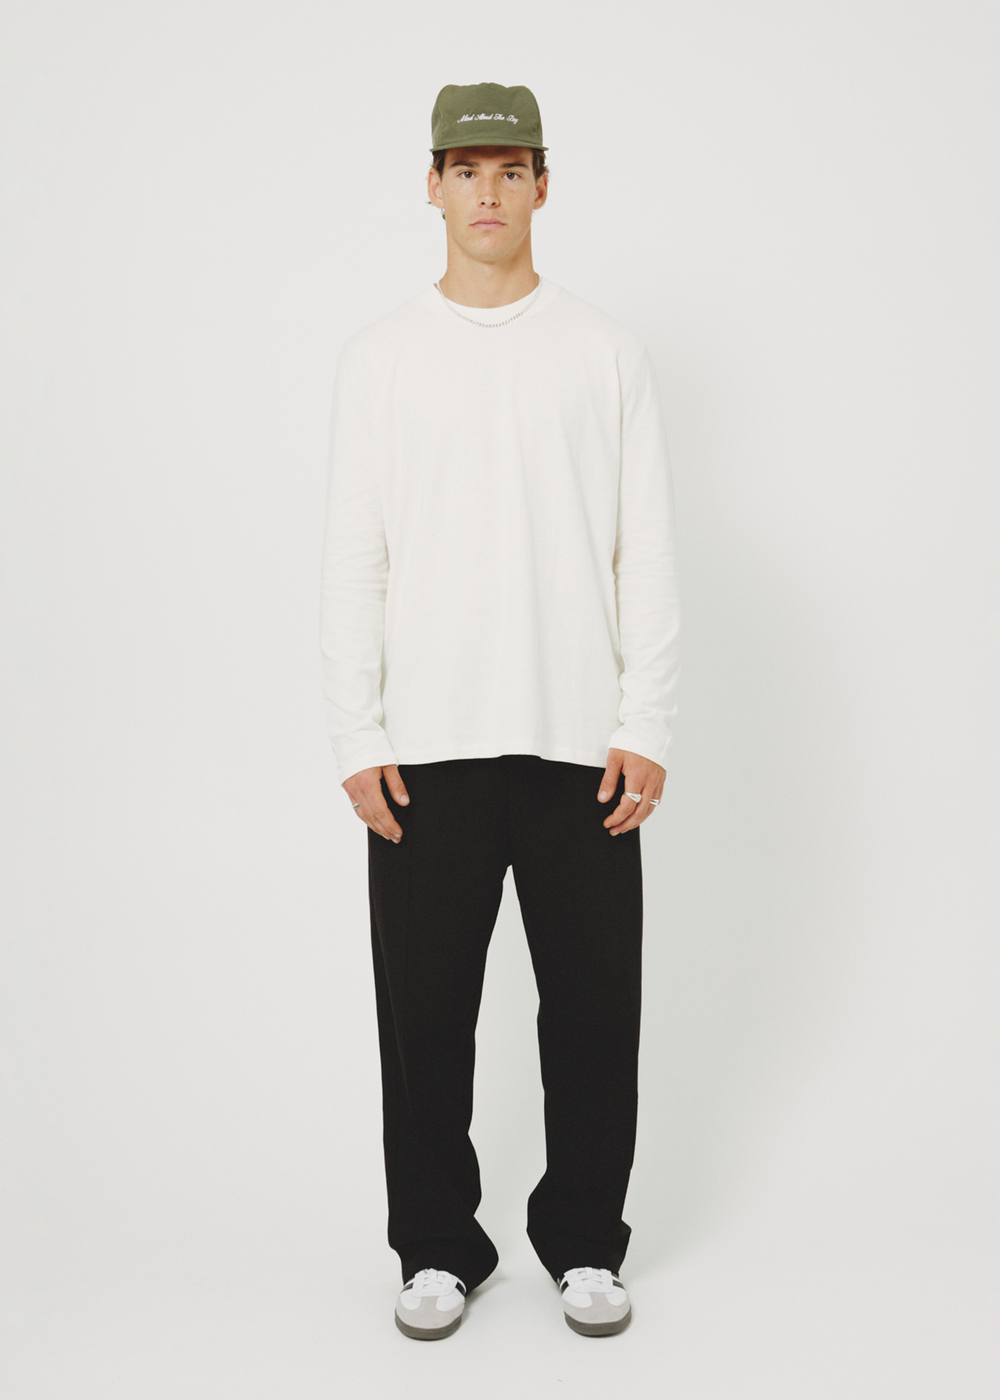 Commoners Hemp Jersey LS - Rice White | COMMONERS | Mad About The Boy